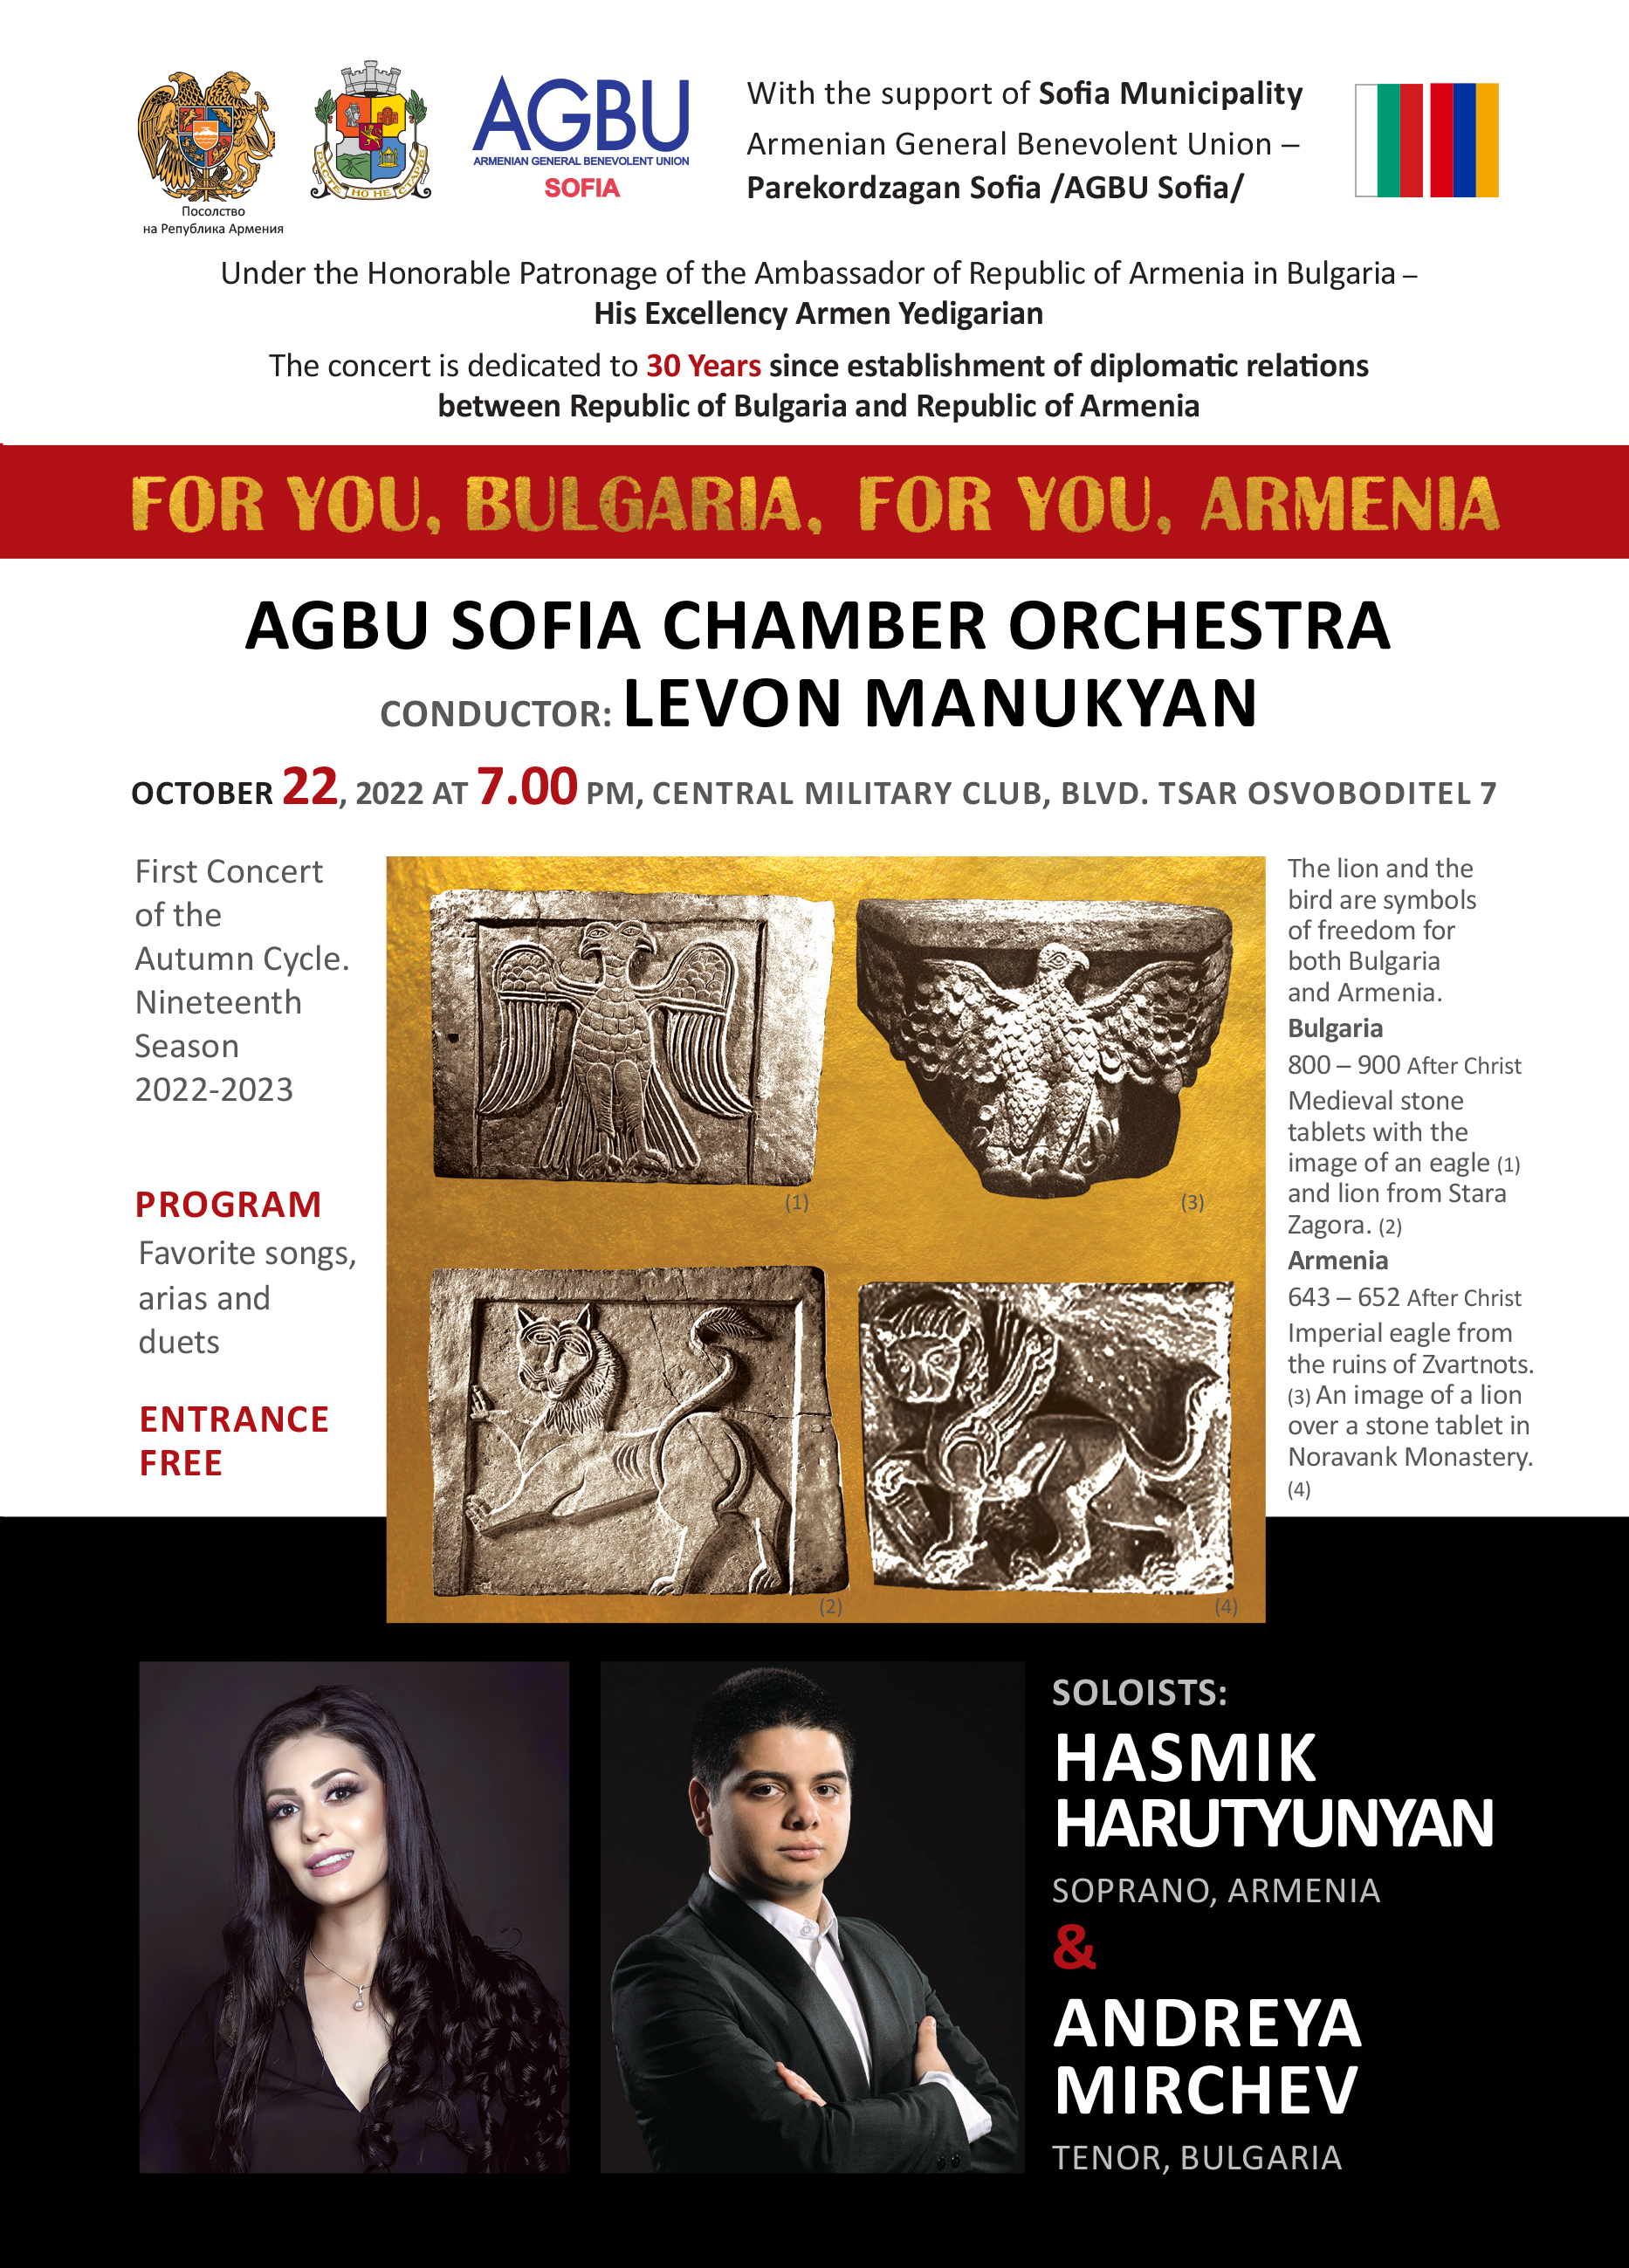 First Concert of the Autumn Cycle Nineteenth Season 2022-2023 of AGBU Sofia Chamber Orchestra